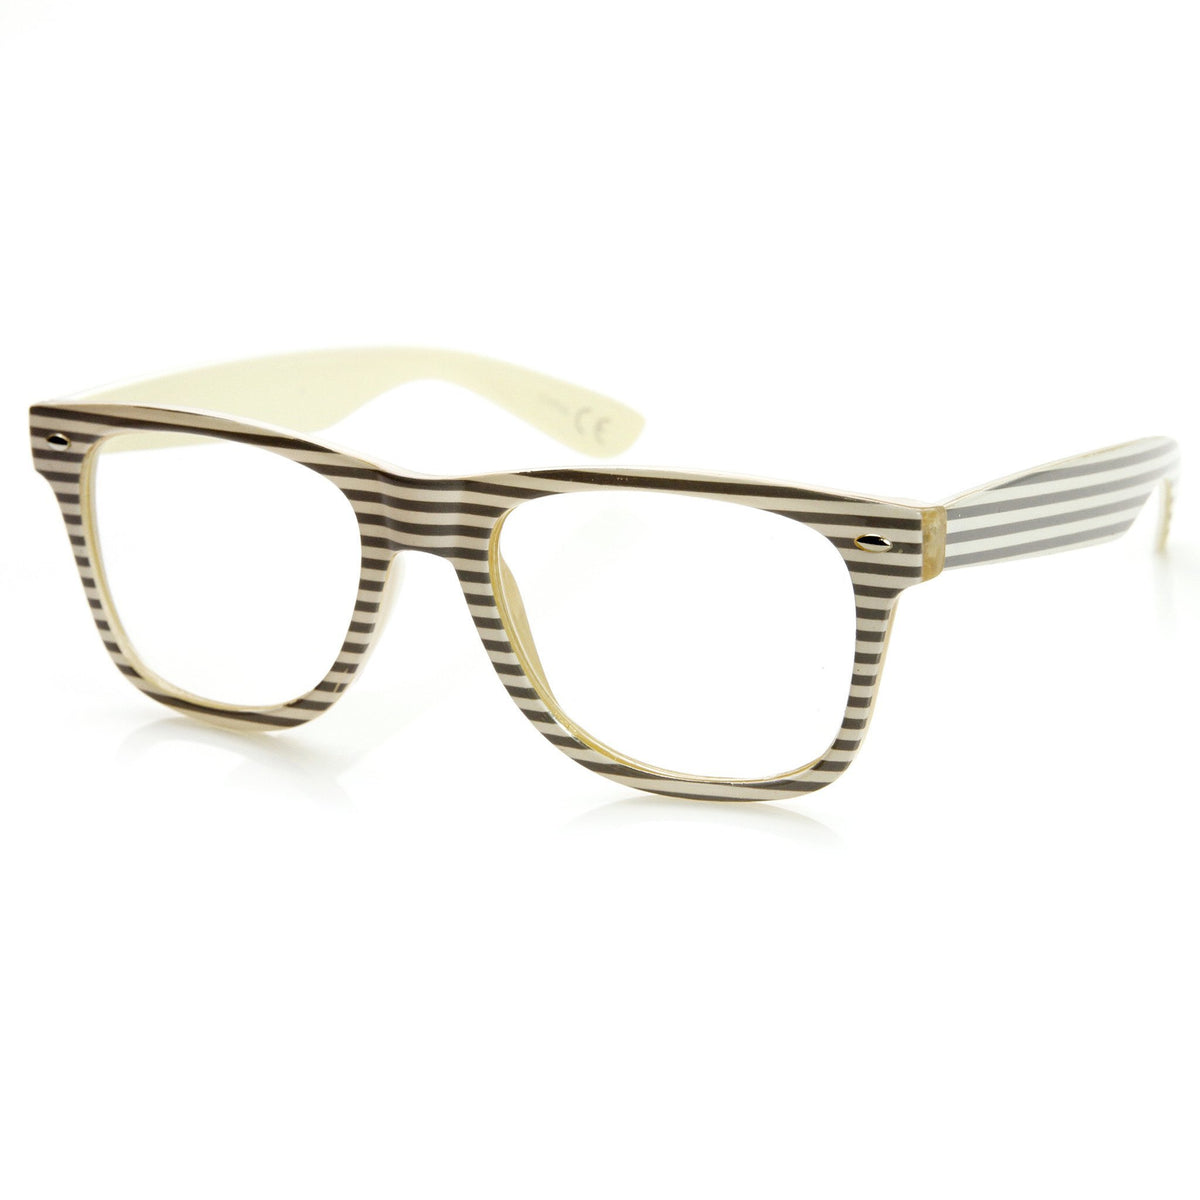 Two Tone Pastel Striped Clear Lens Horned Rim Glasses